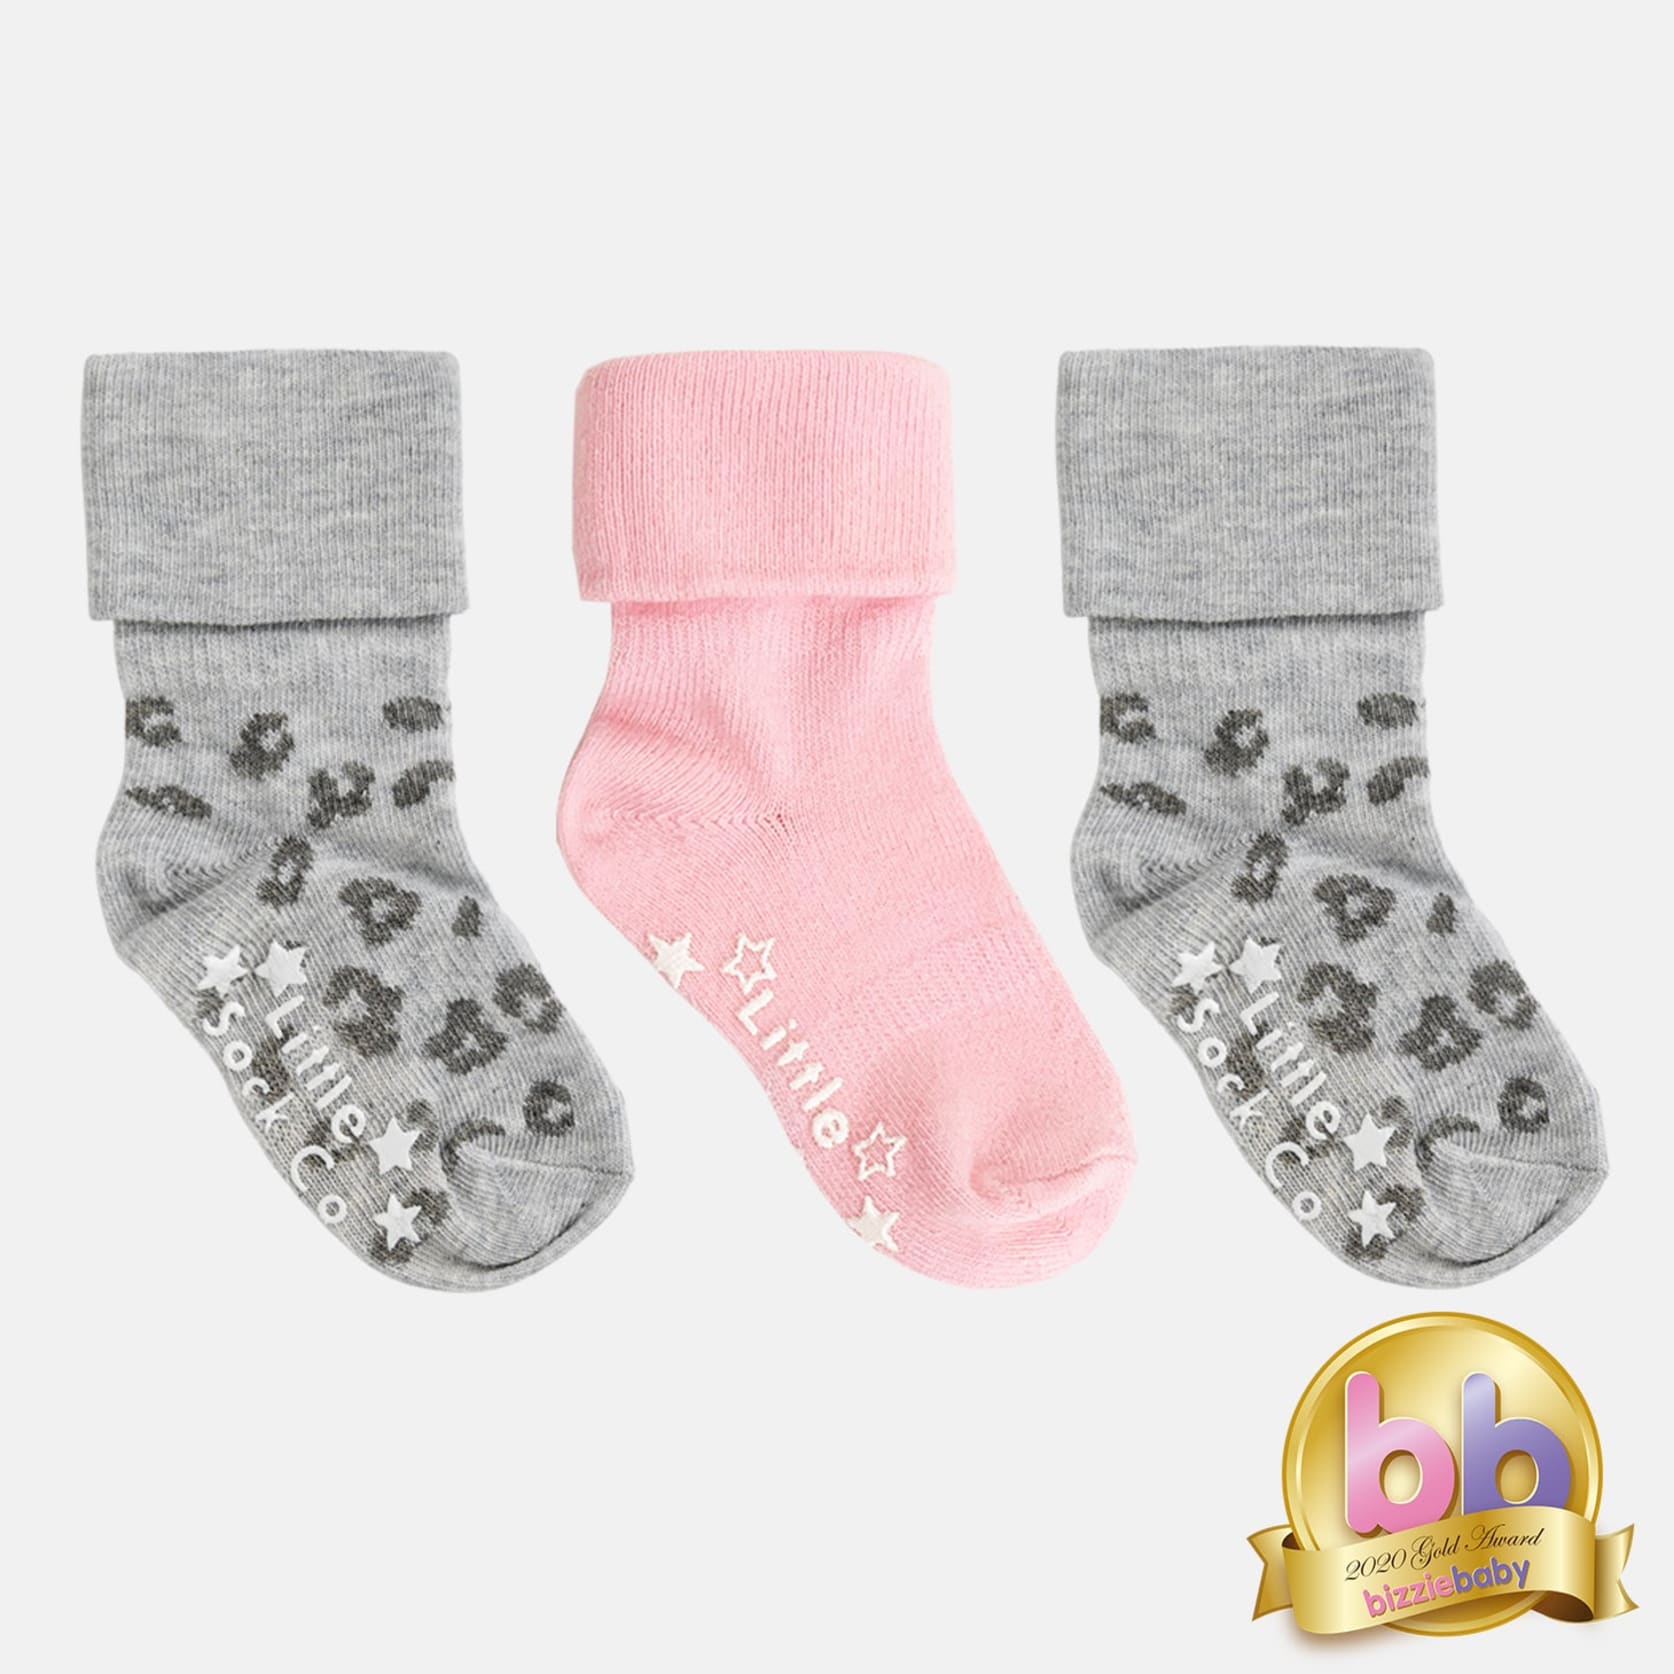 Non-Slip Stay On Baby and Toddler Socks - 3 Pack in Pink and Animal